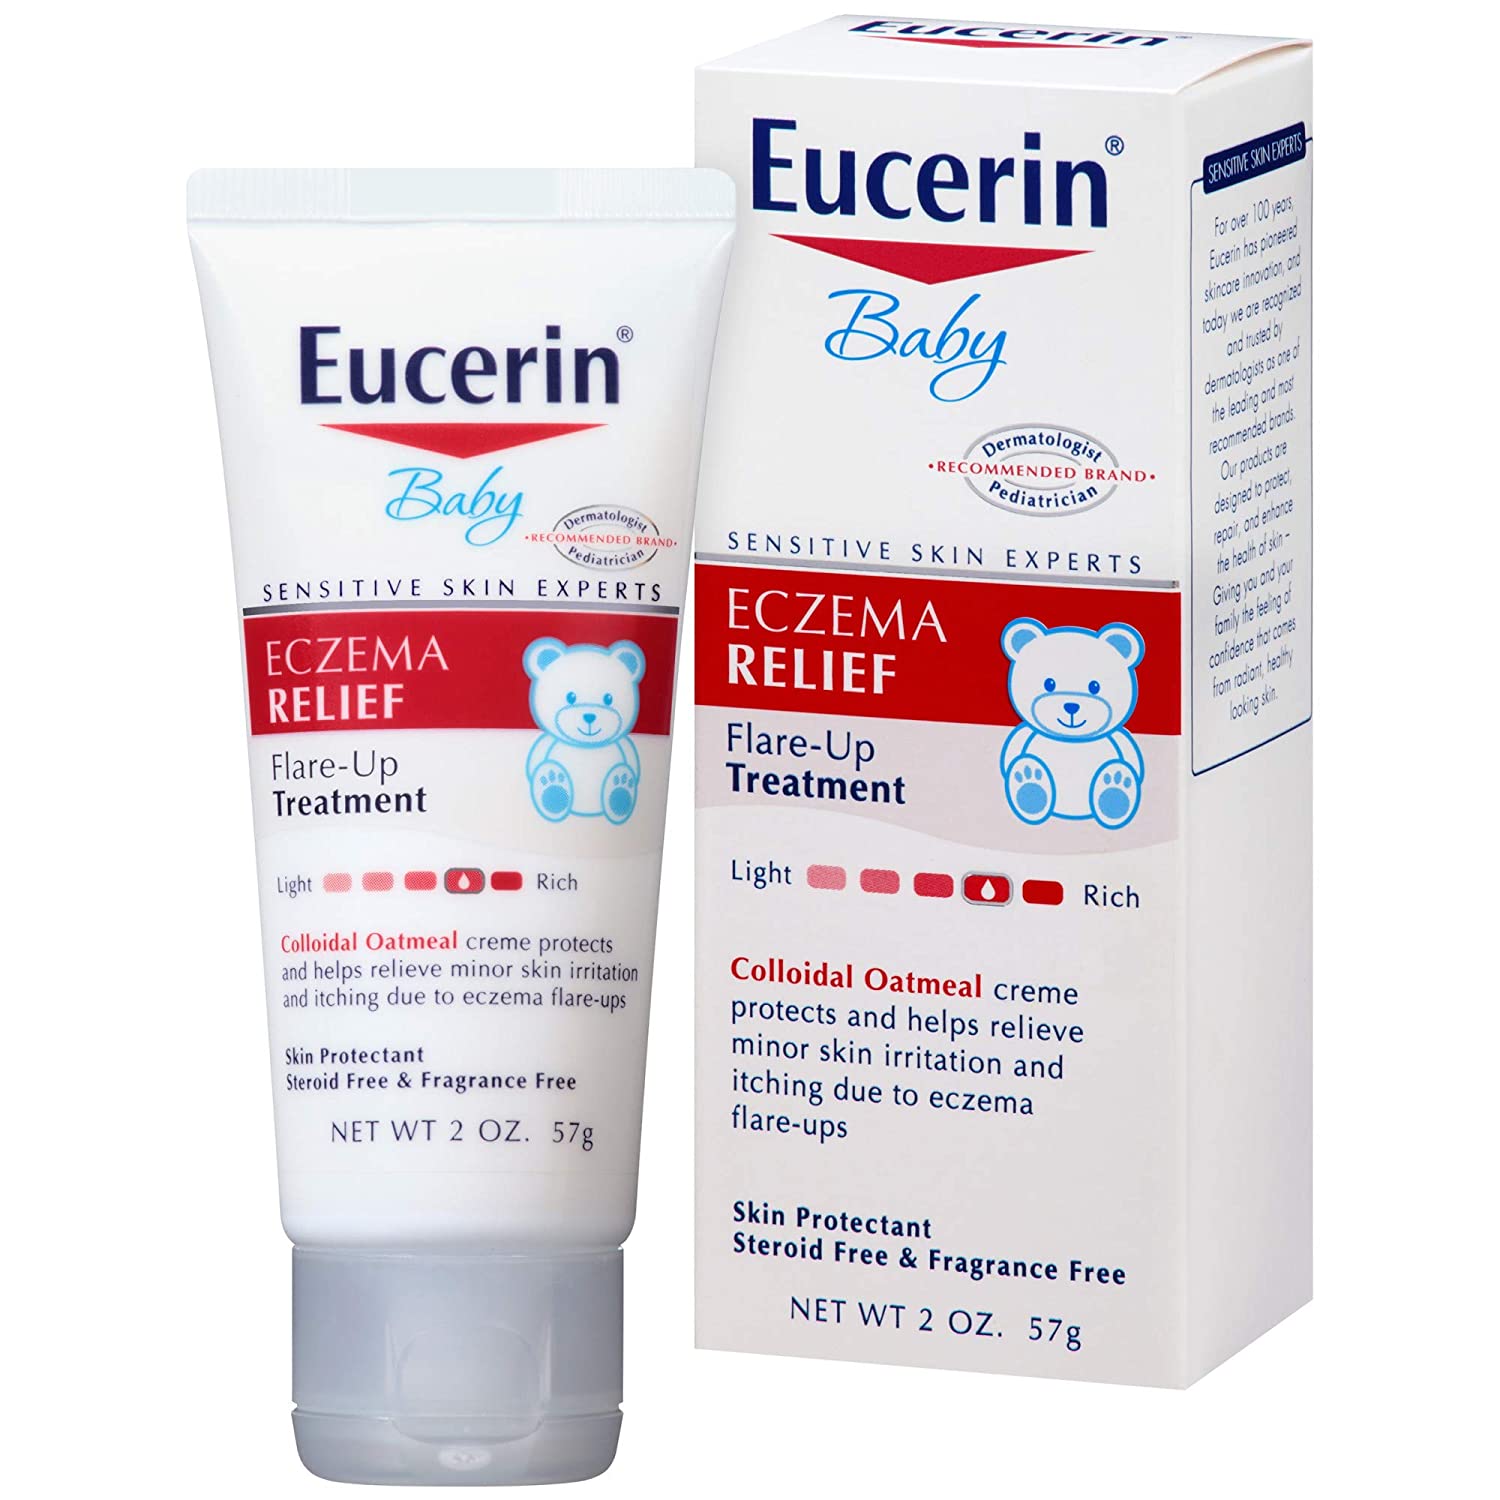 Eucerin Baby Eczema Relief Flare-Up TreatMent 2 Ounce by Eucerin